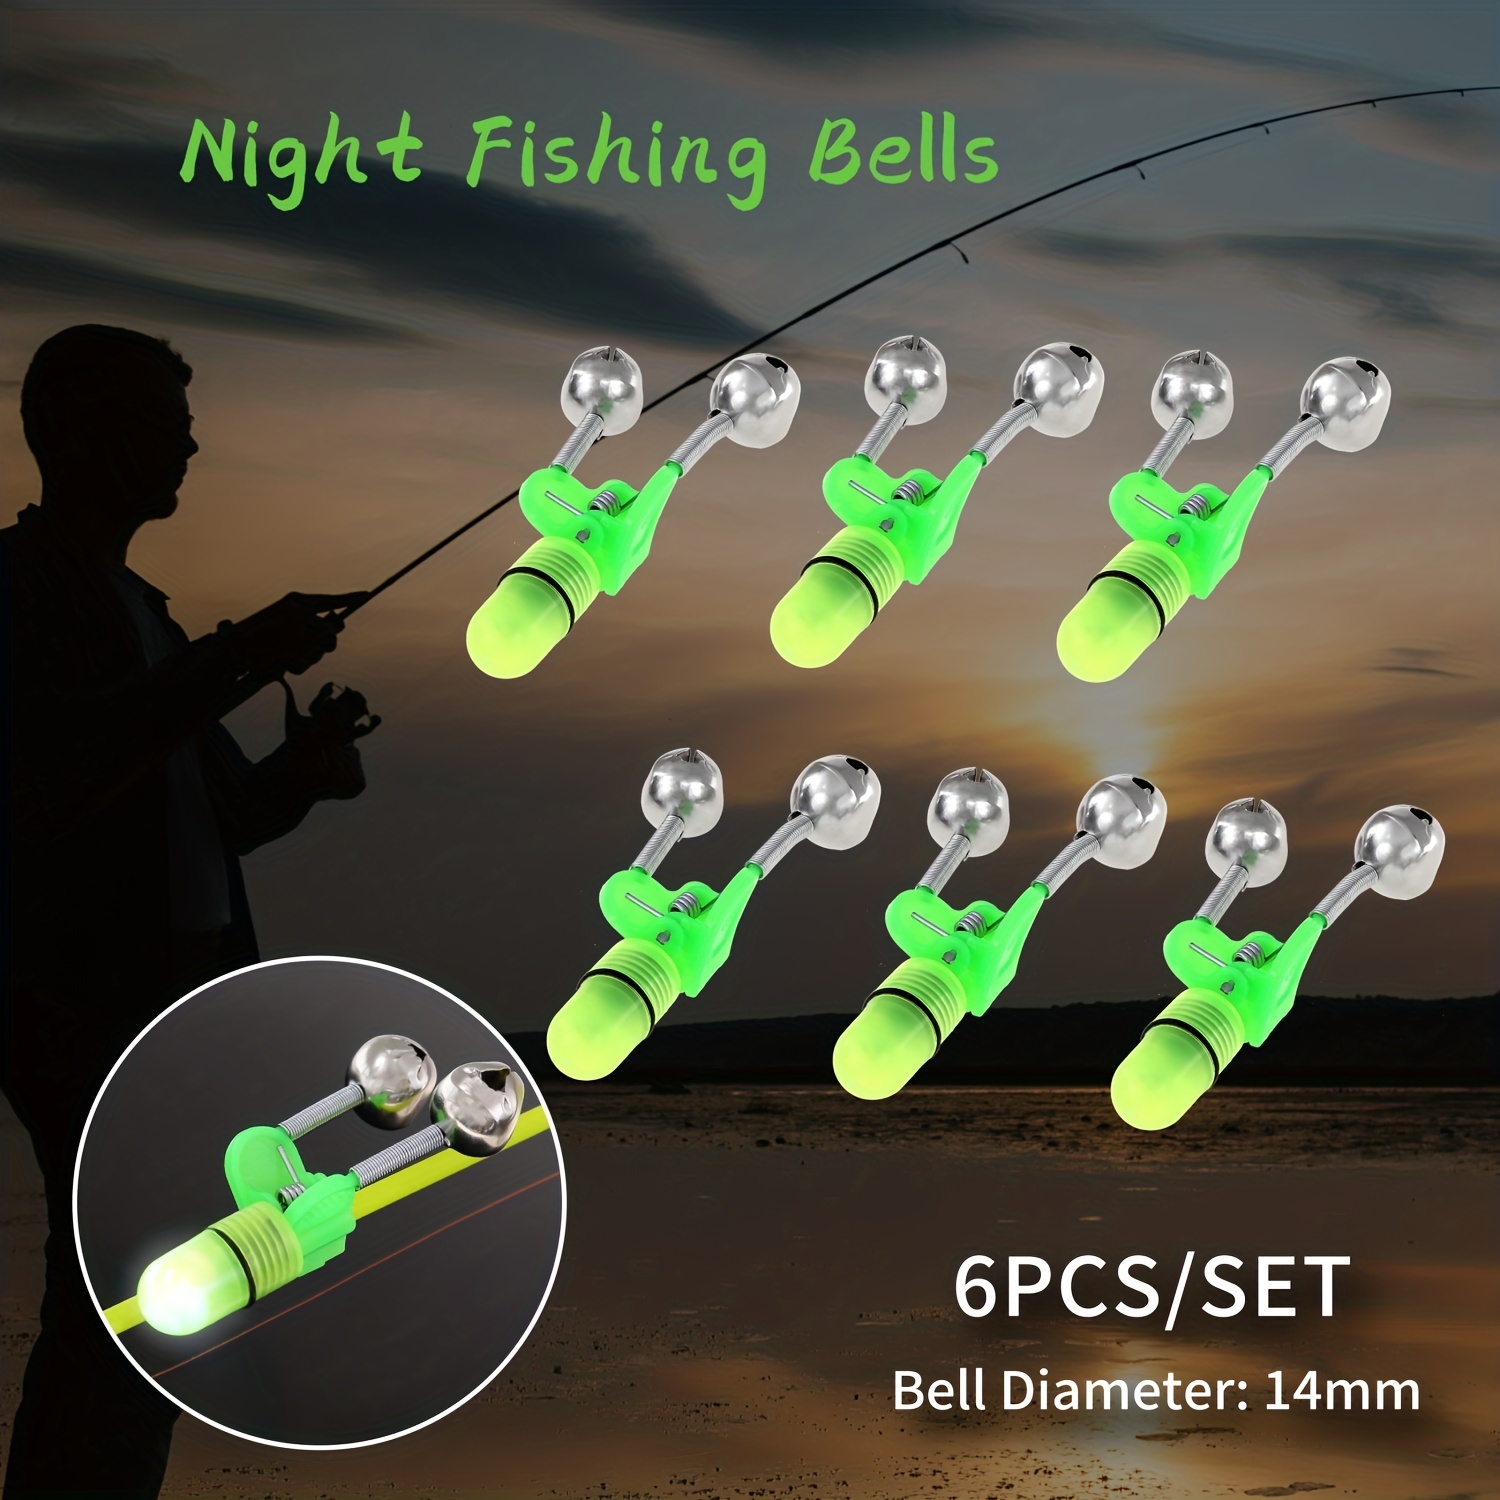 Catch More Fish With The Goture Sensitive Electronic Fishing Alert